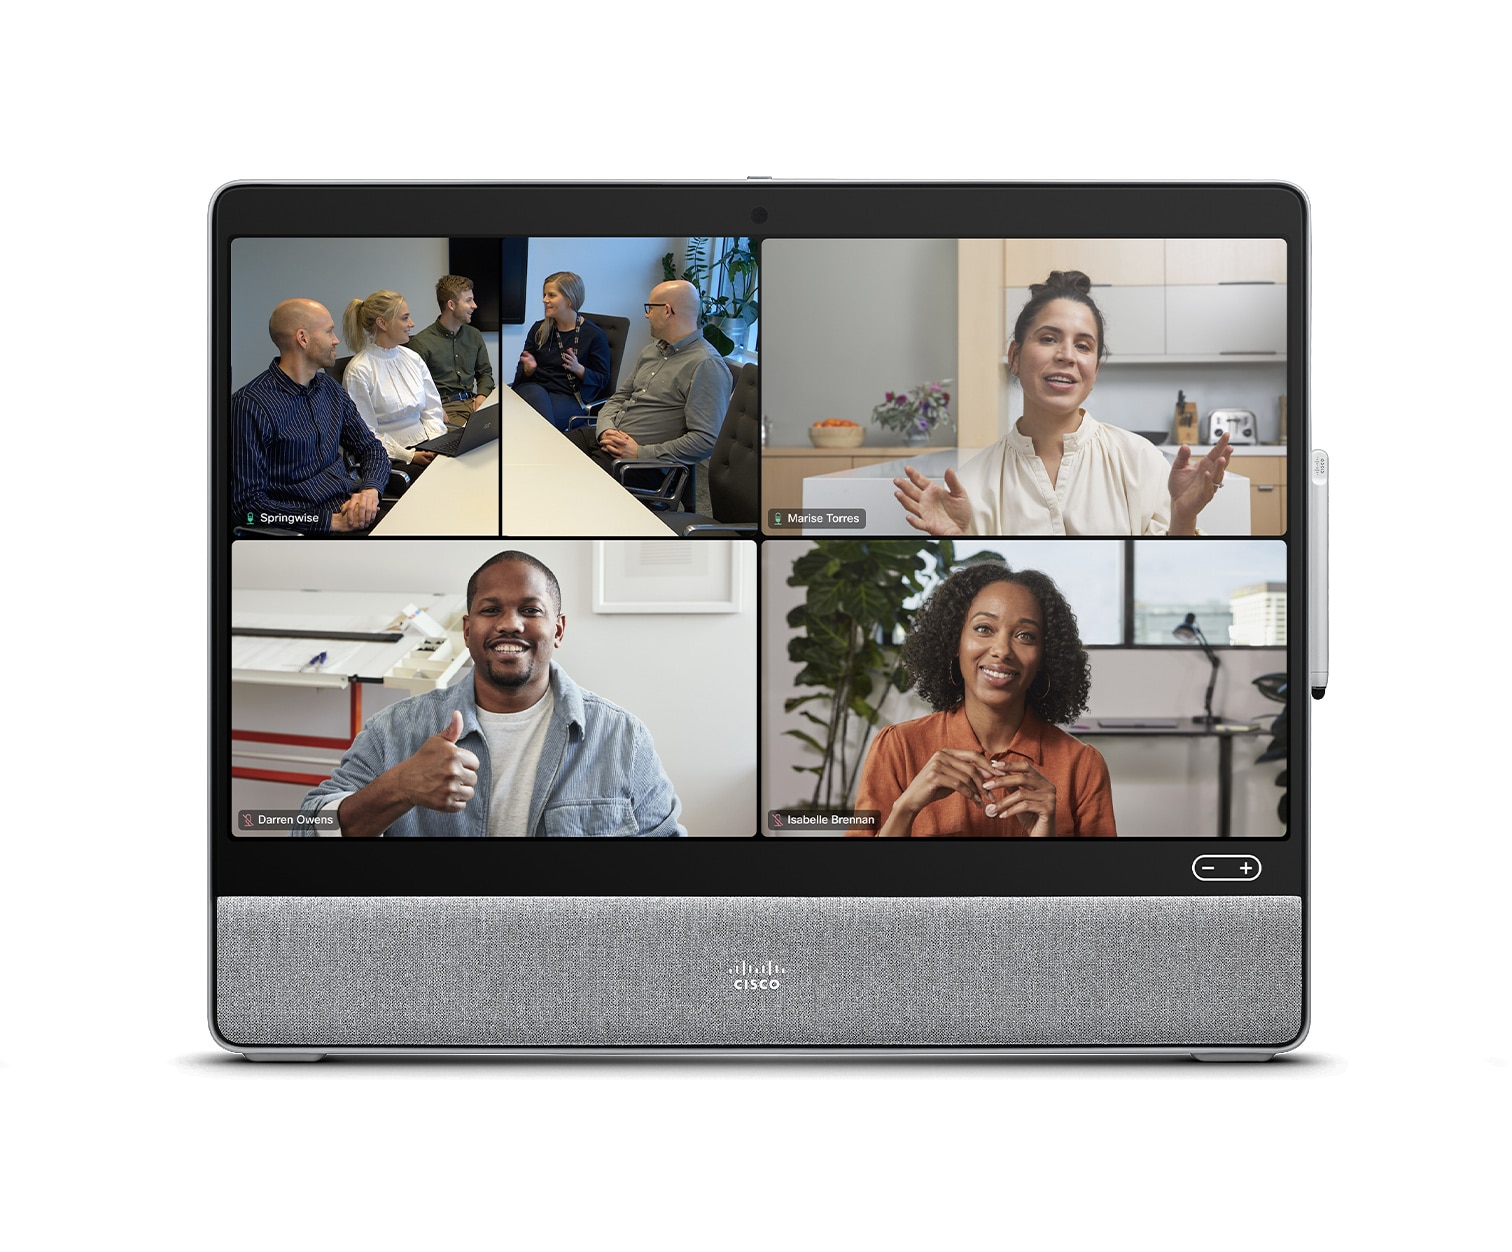 Frames view on Cisco Desk device with Webex meeting platform and 5 people selected for video conference.